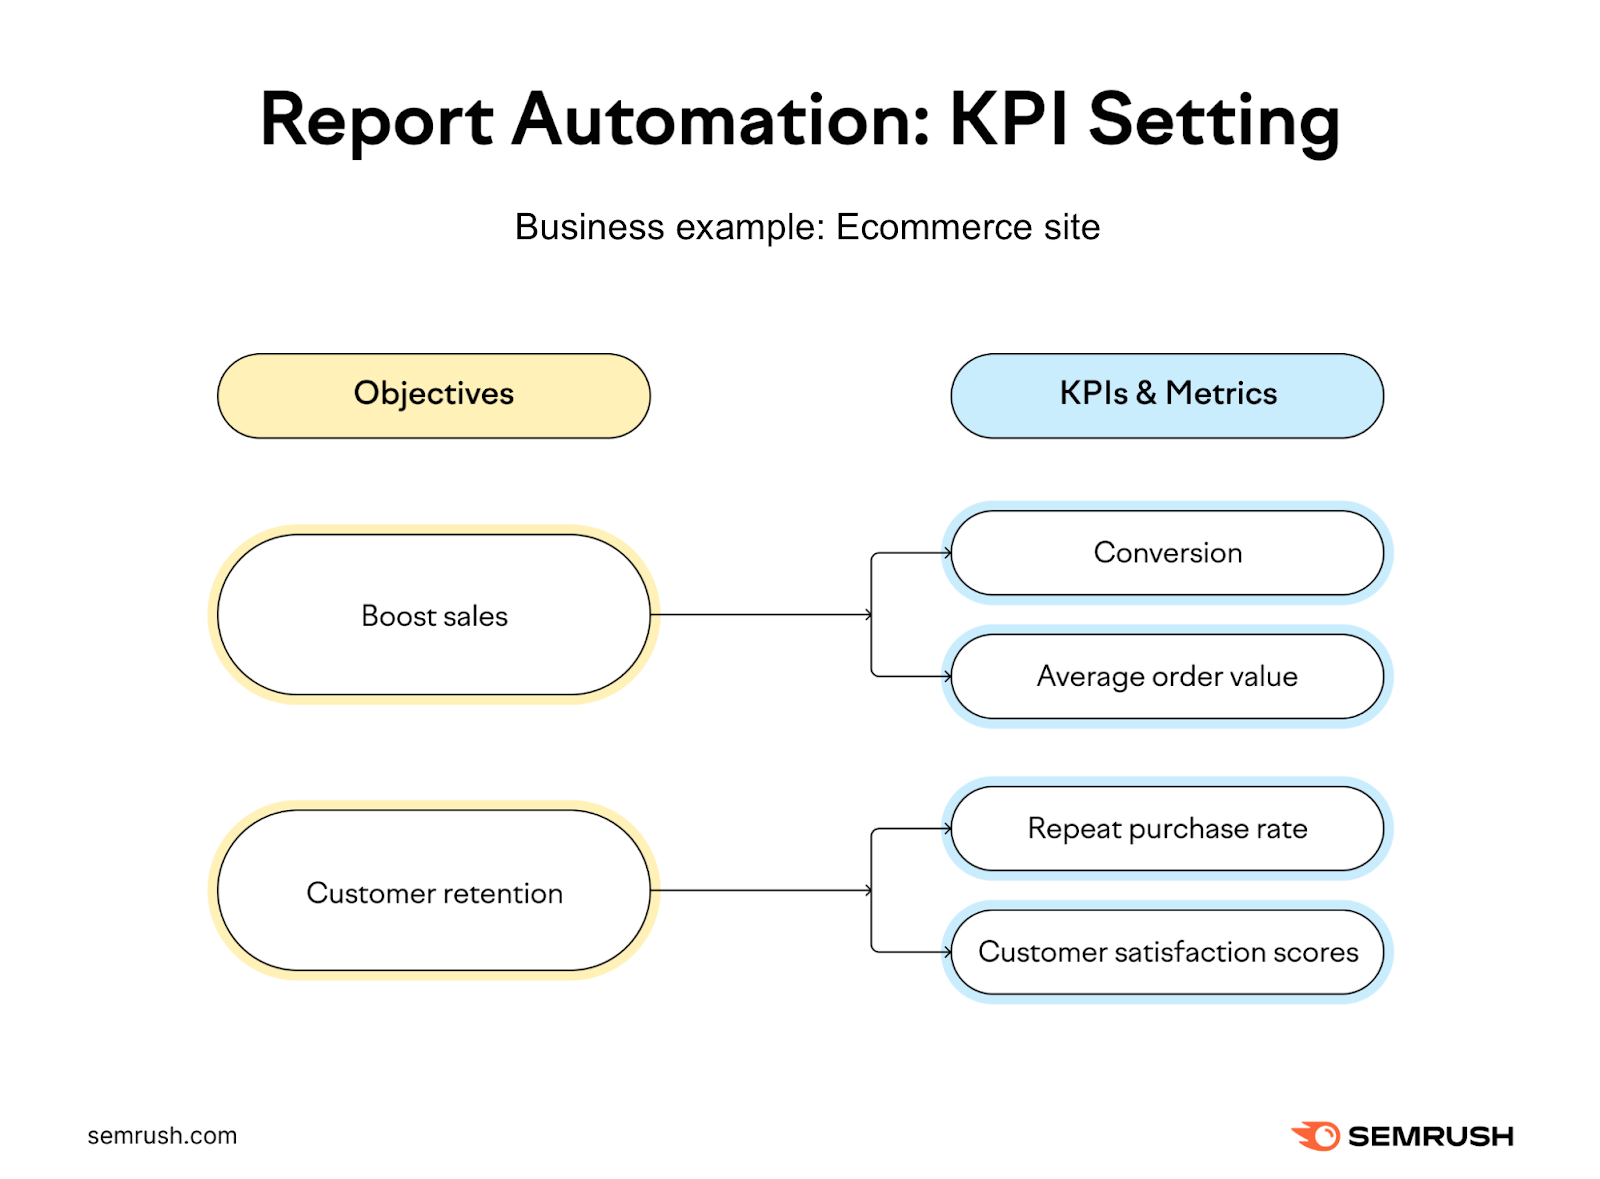 Building a single report for an ecommerce site, including "objectives" and "kpis and metrics"